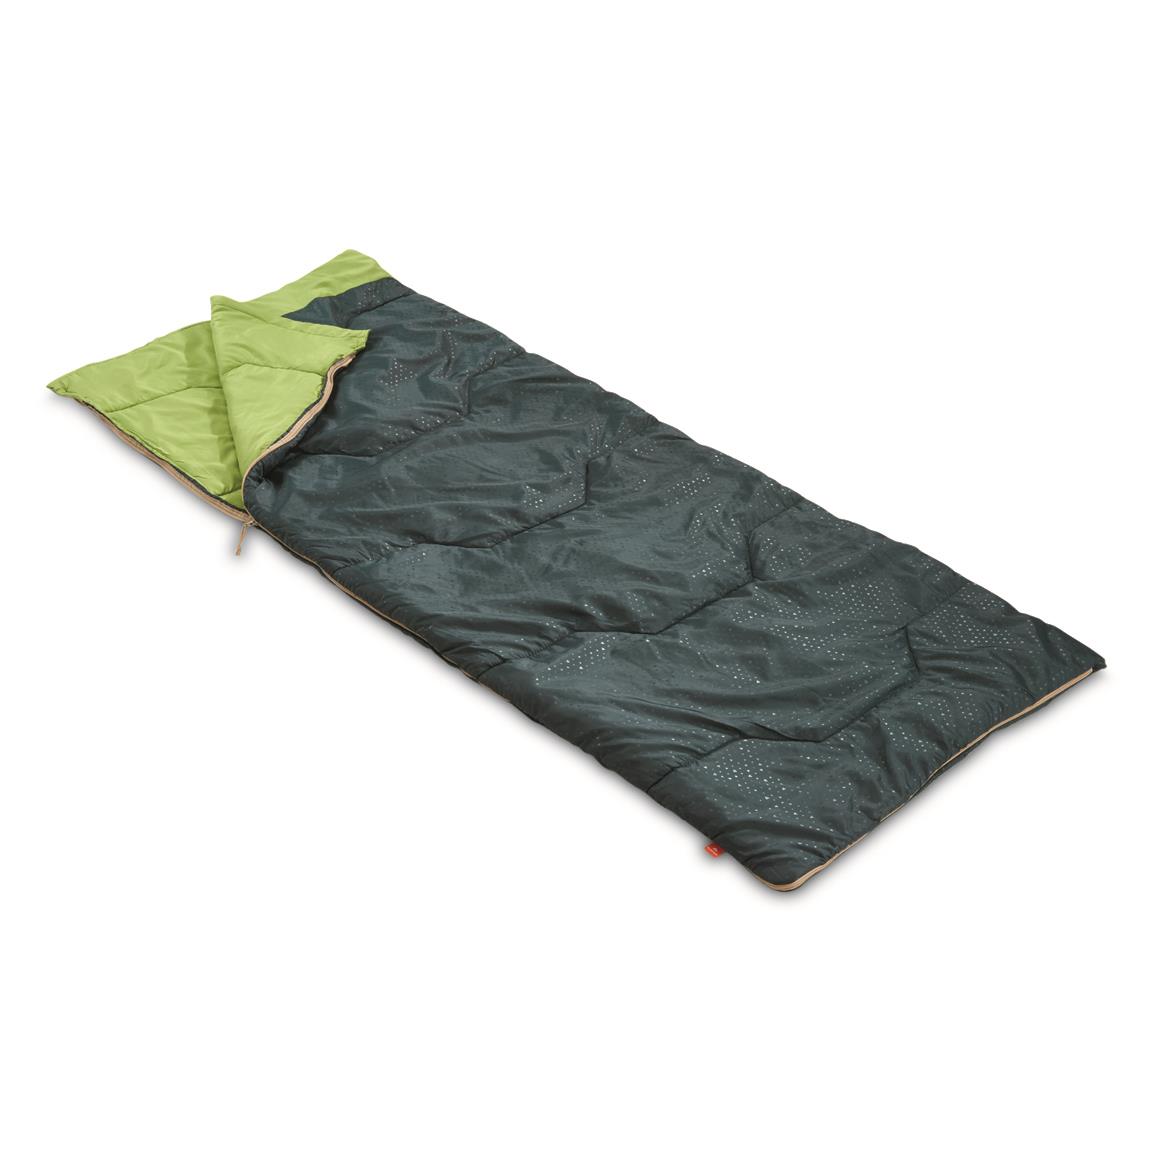 NATO Disaster Relief Sleeping Bag, New, Olive Drab